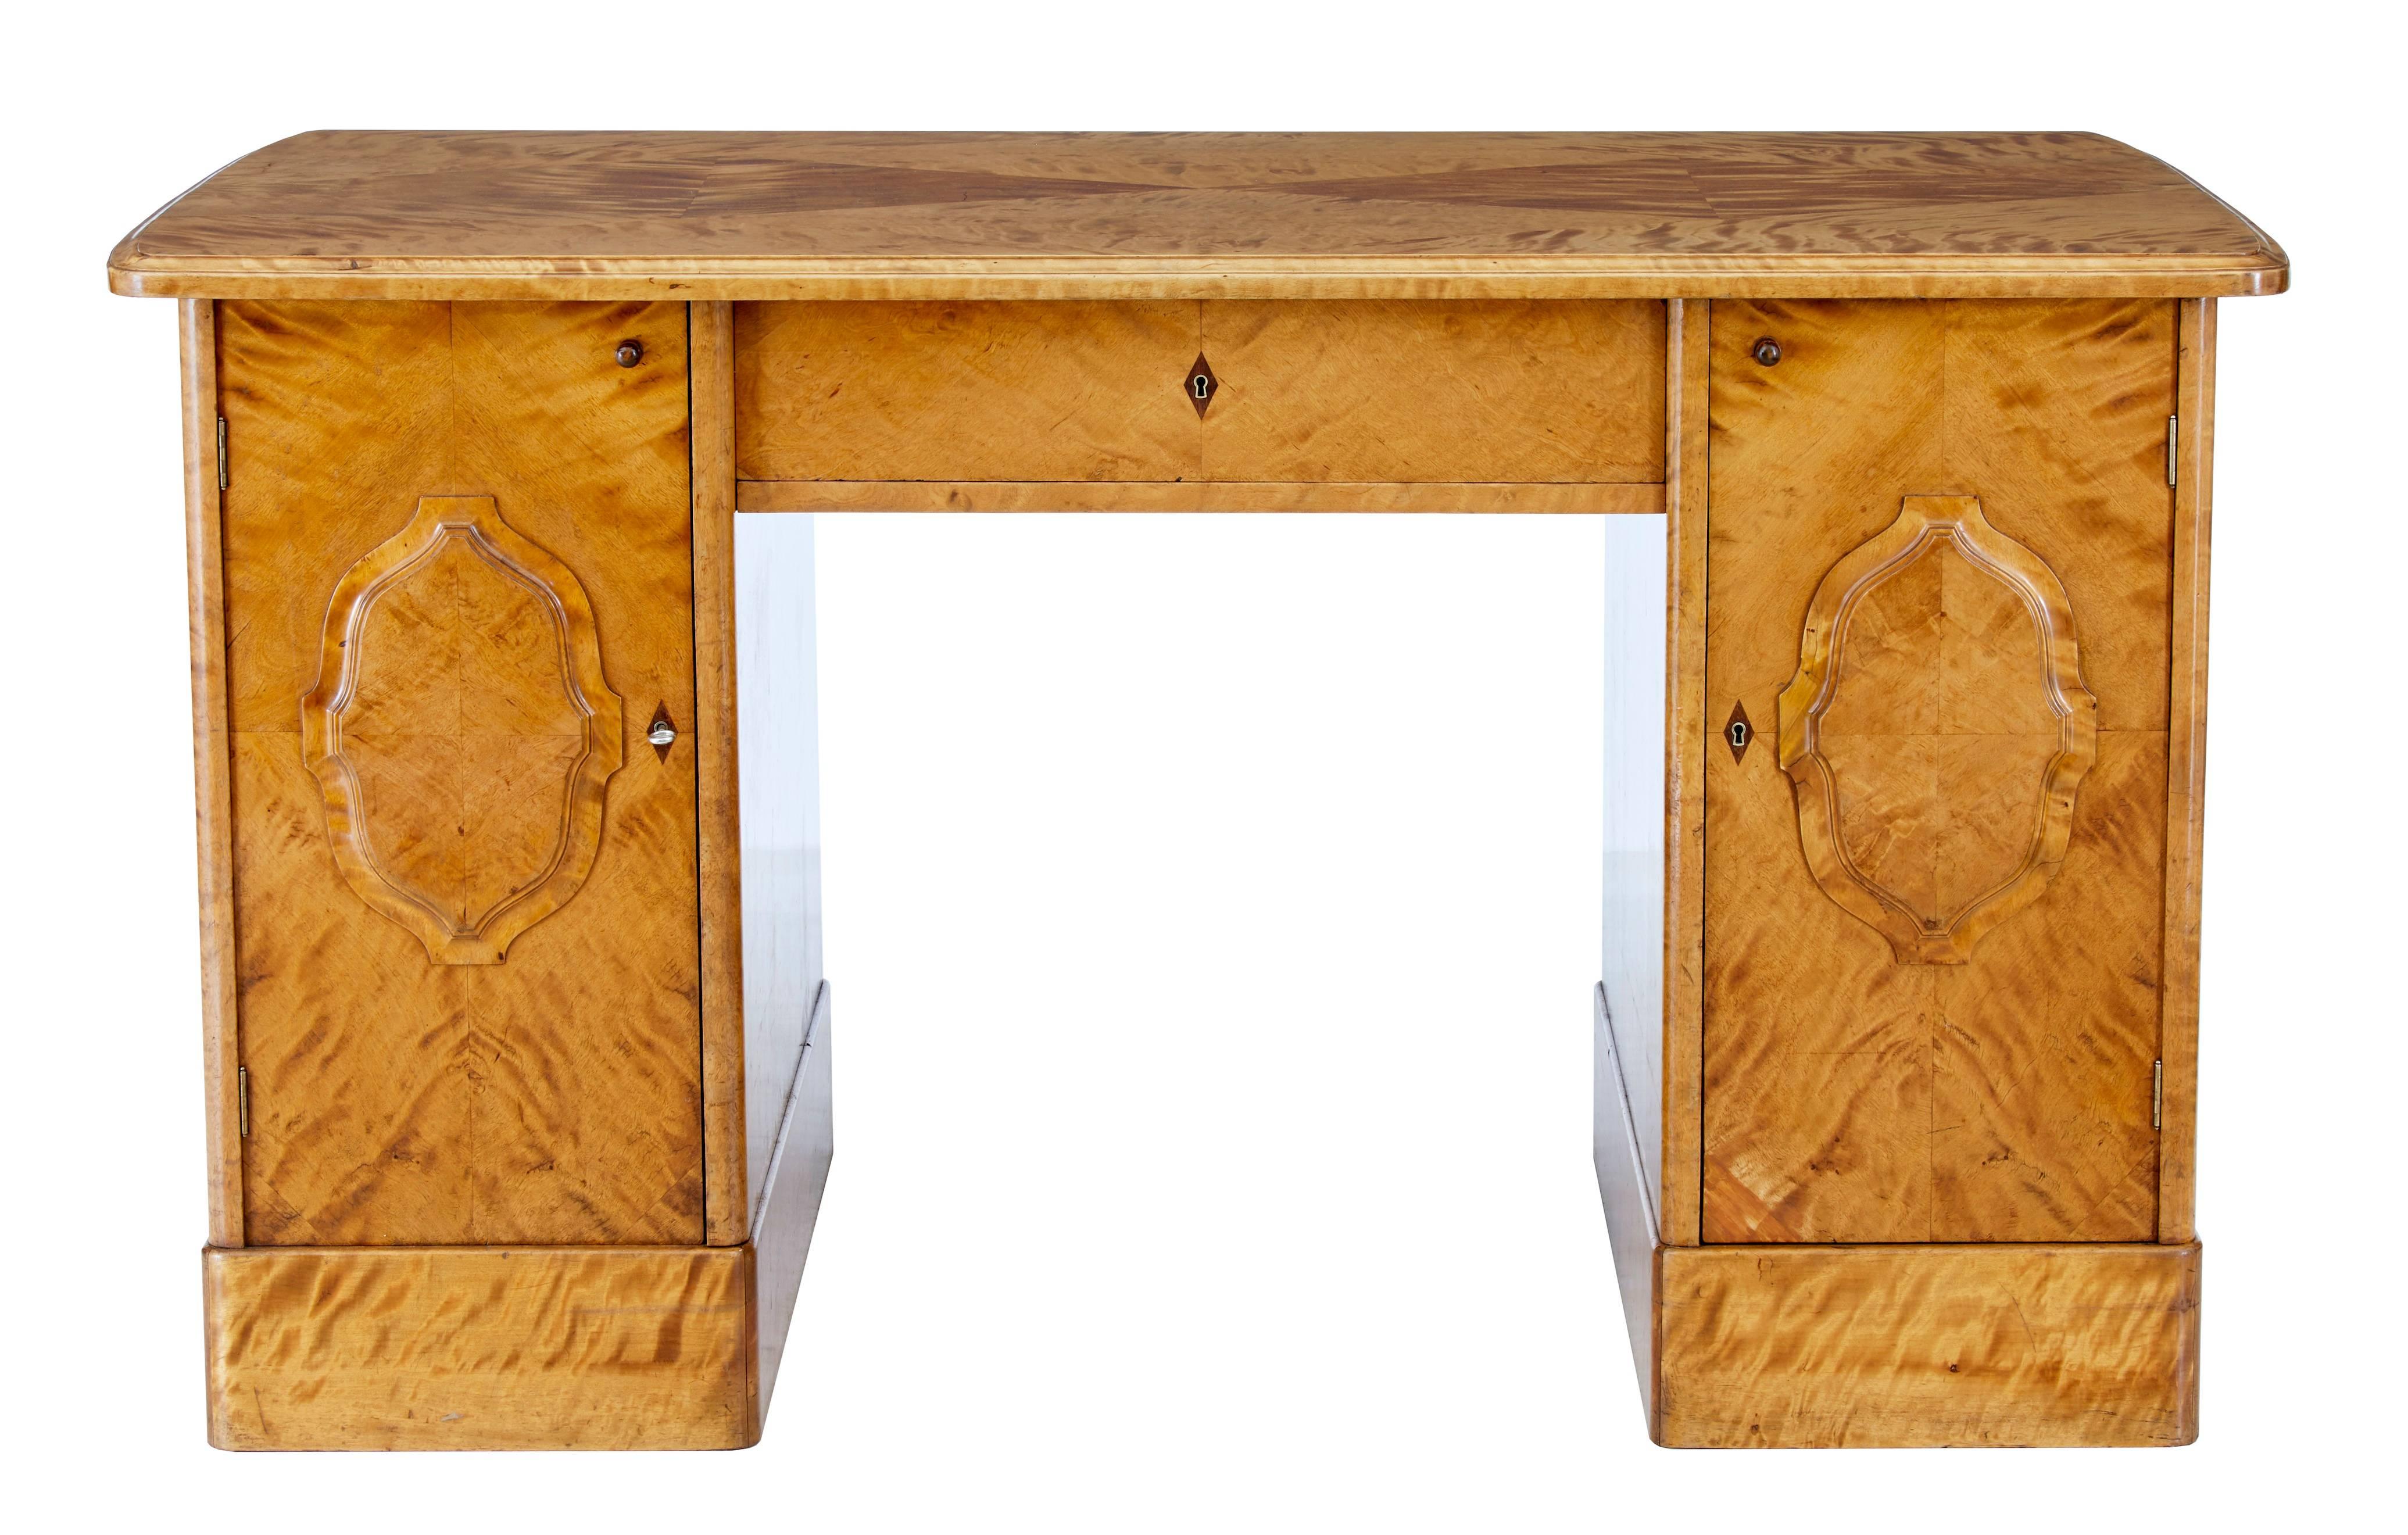 Pedestal desk in rich birch, circa 1910.
Two pedestals with removable central section and writing surface.
Each pedestal contains two shelves and two sliding drawers.
Standing on plinth base.
Age splits to top, but structurally